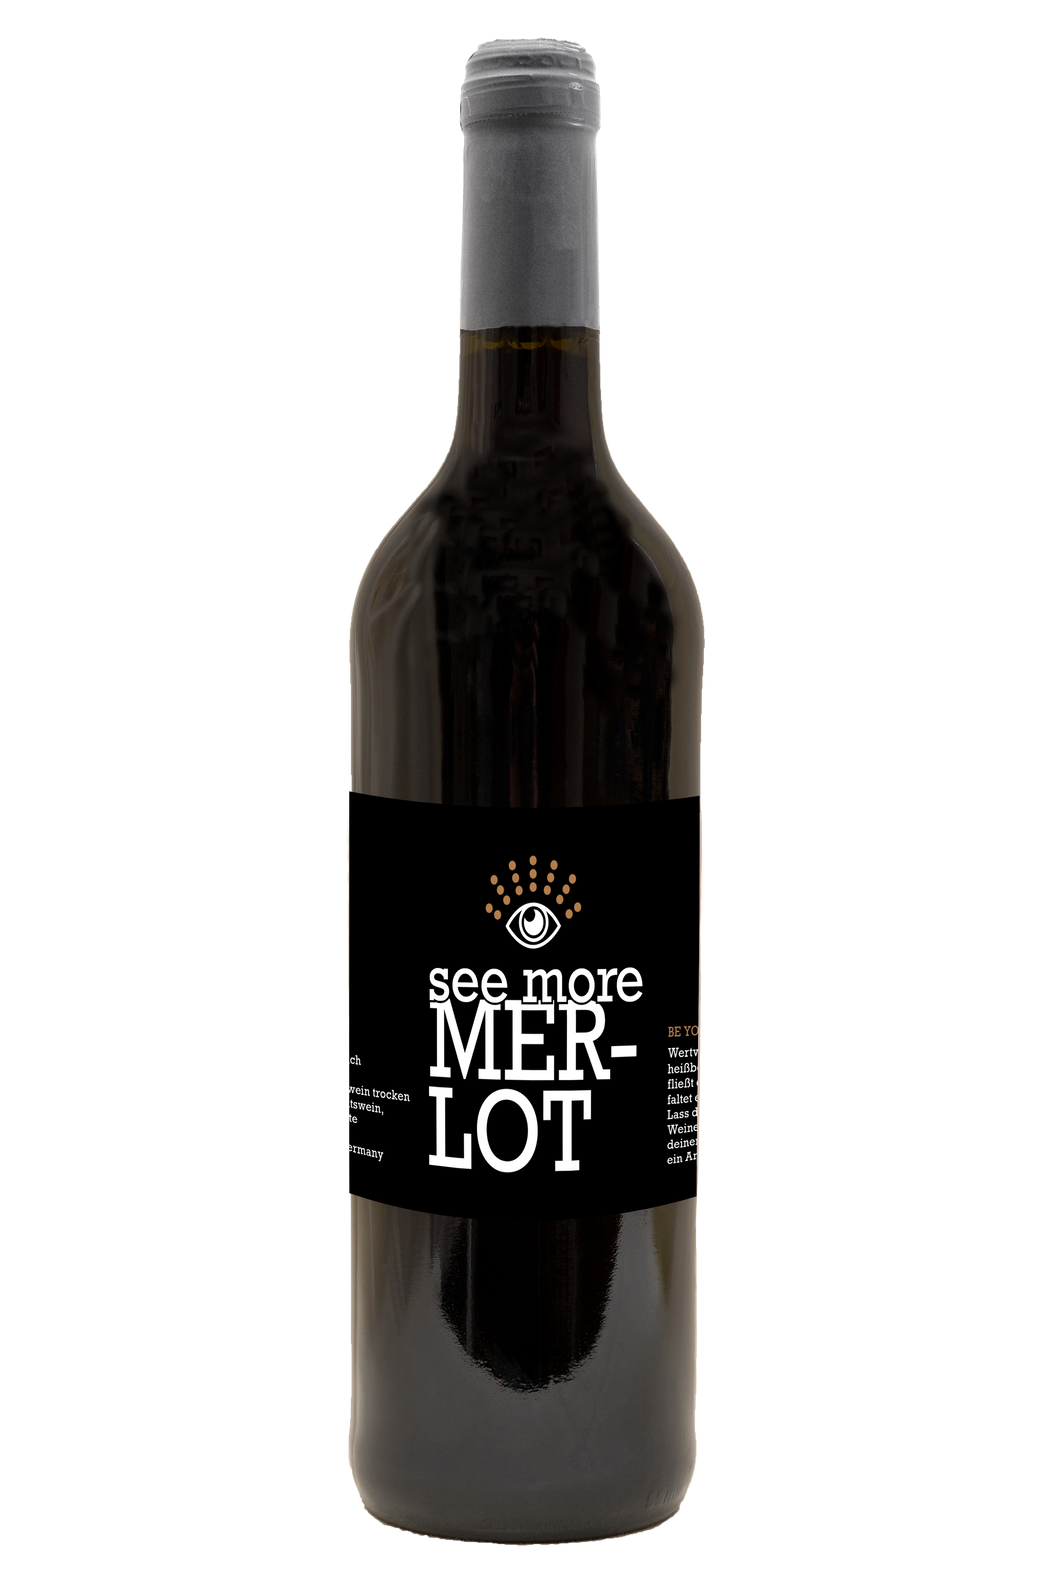 see more MERLOT - BE YOUR OWN SOMMELIER